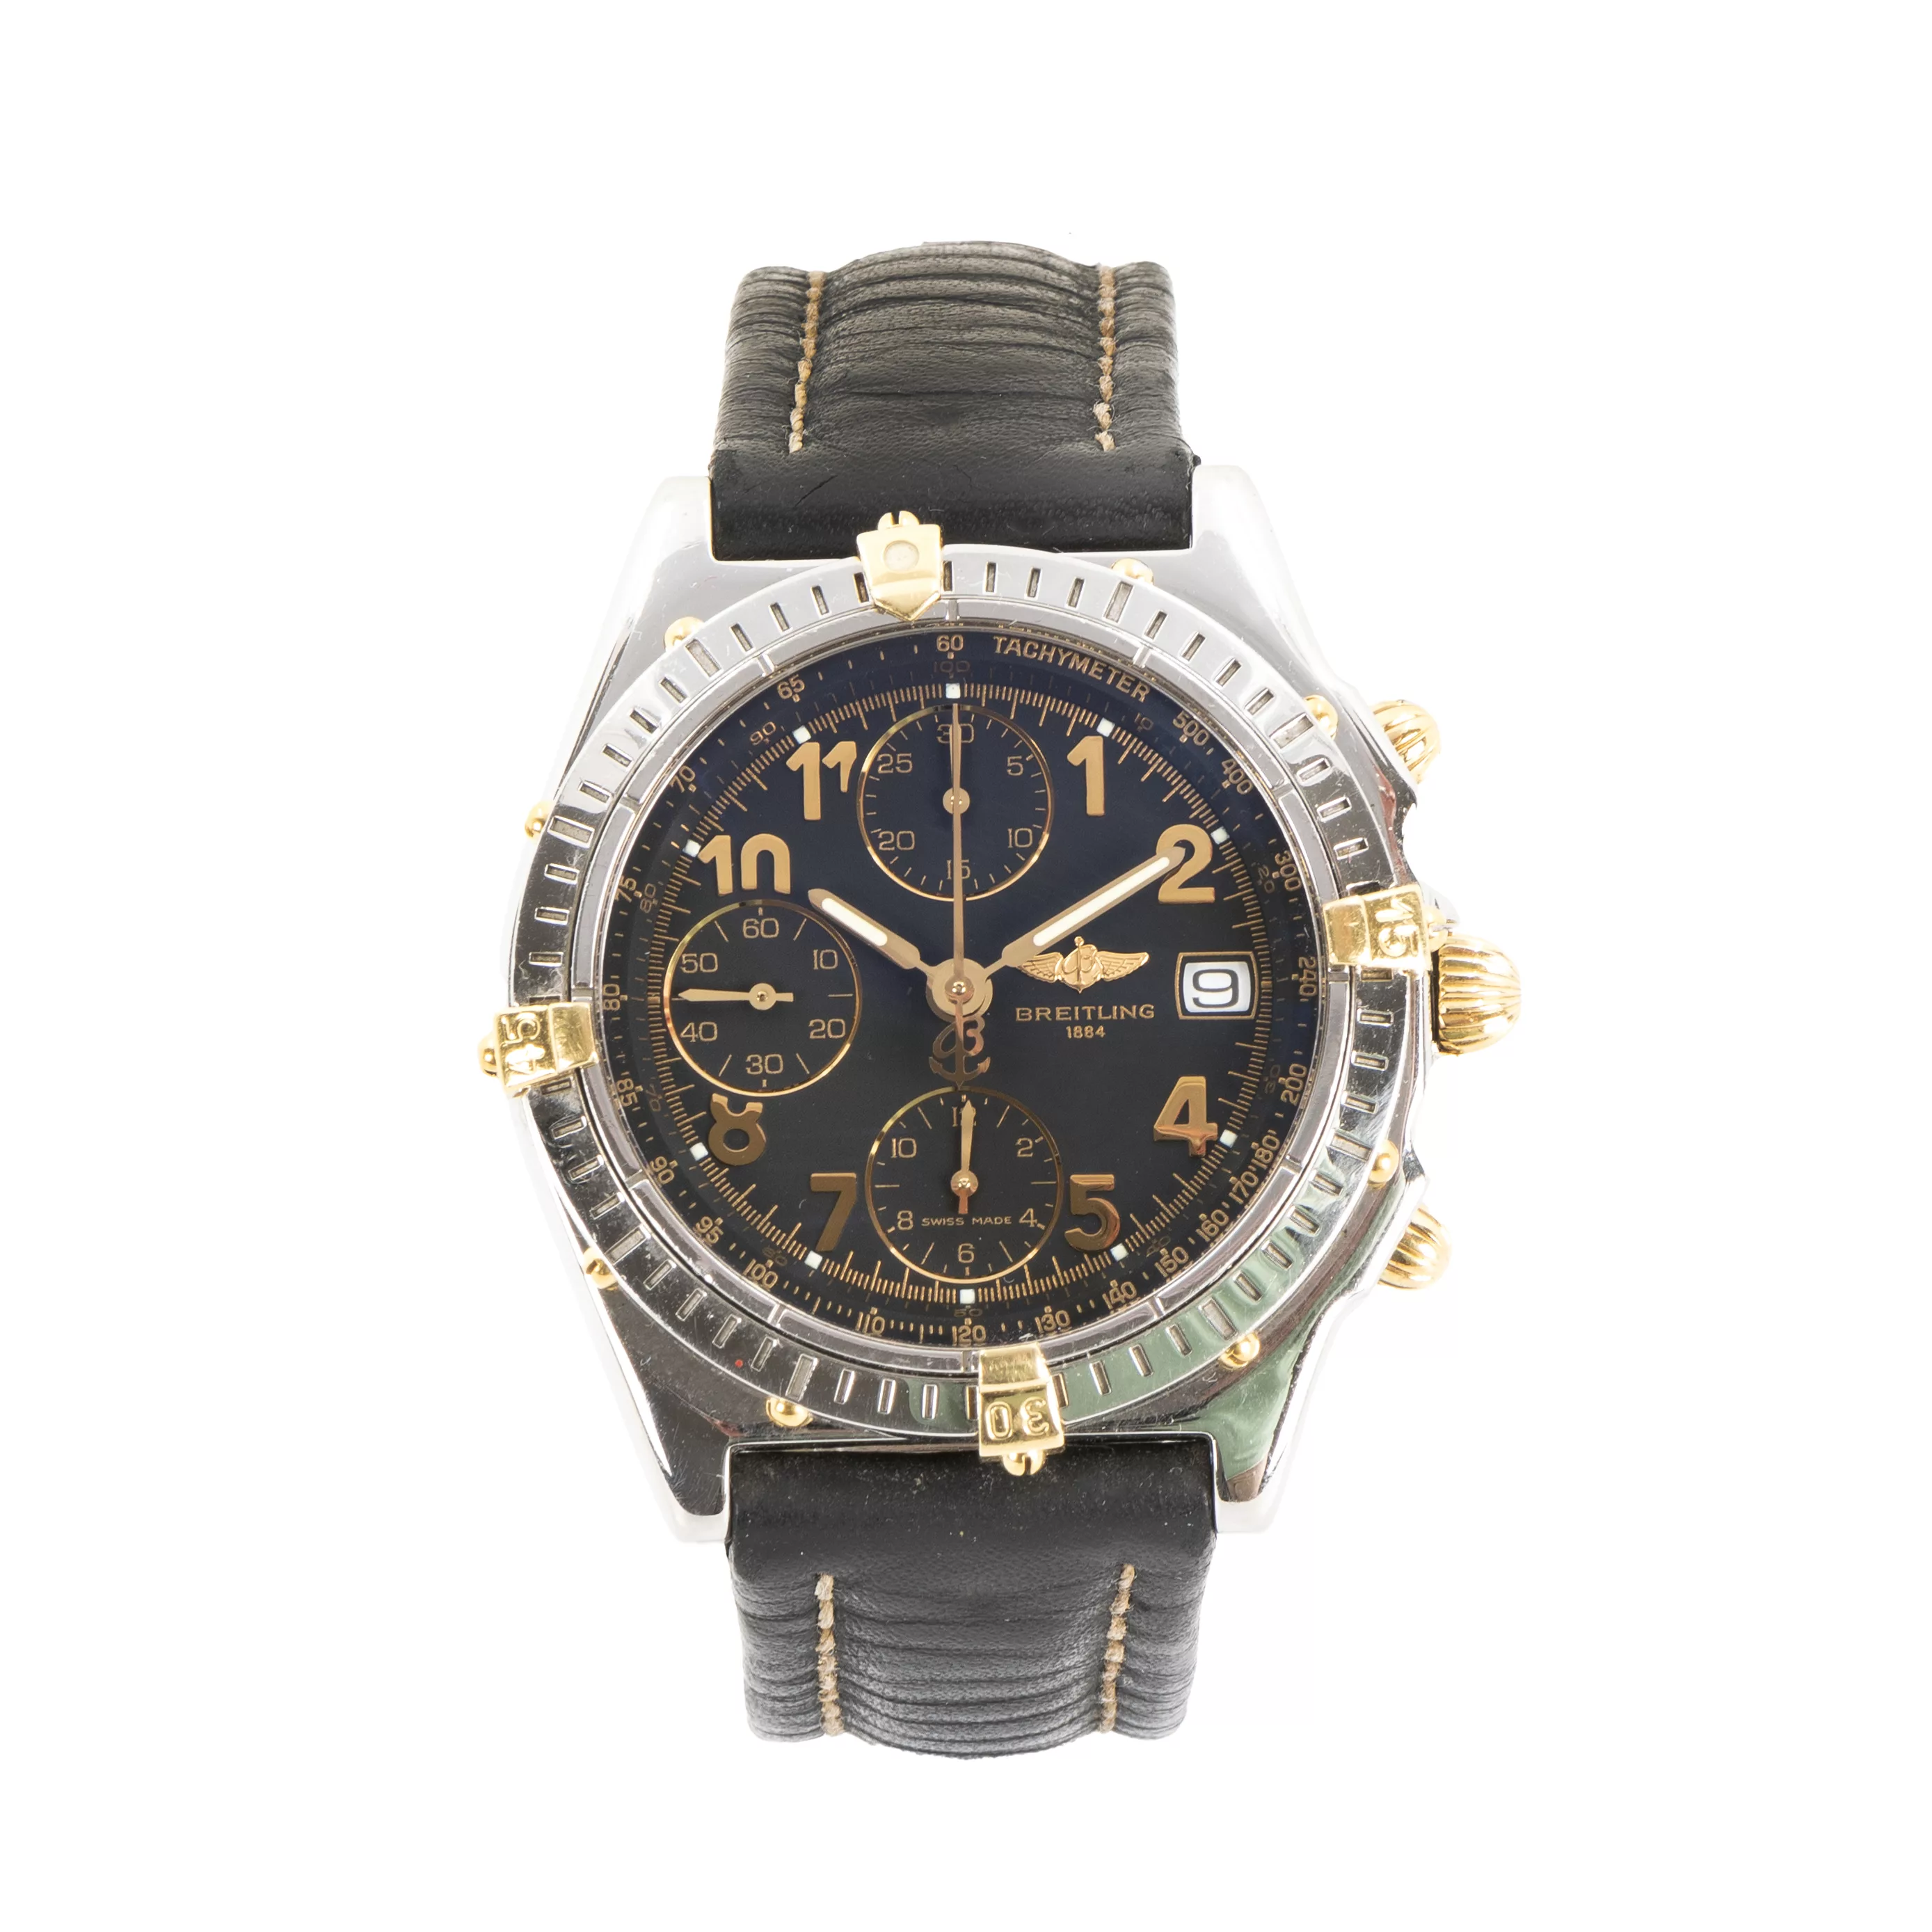 Breitling Chronomat B13050.1 38mm Steel and yellow gold